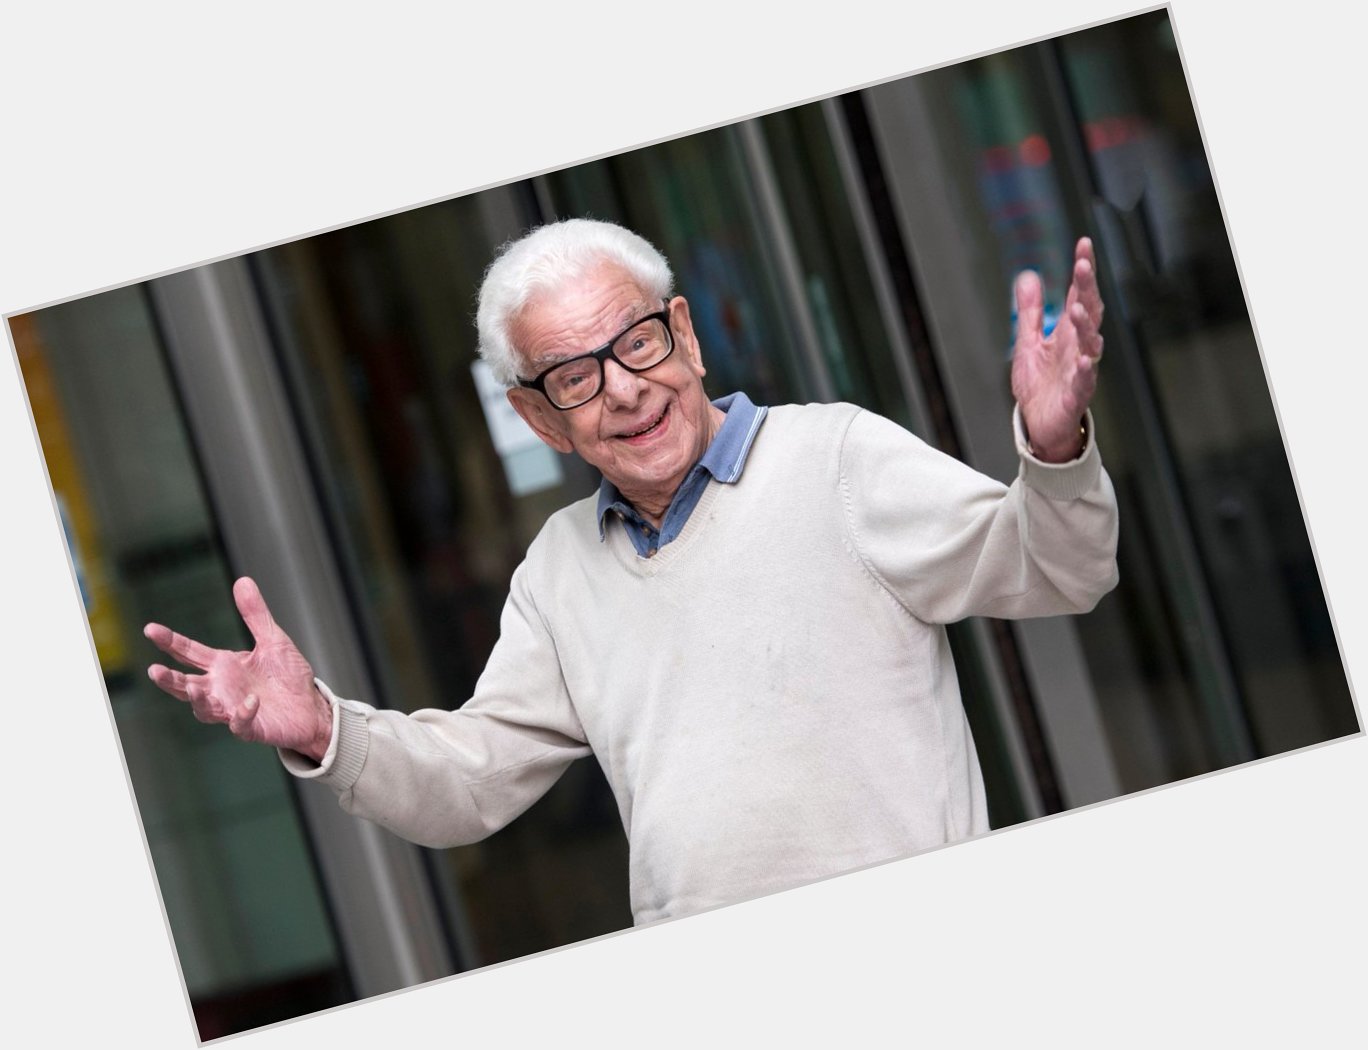 Good morning.
It\s 23 March 2021.
Happy birthday to Barry Cryer and Chaka Khan. 